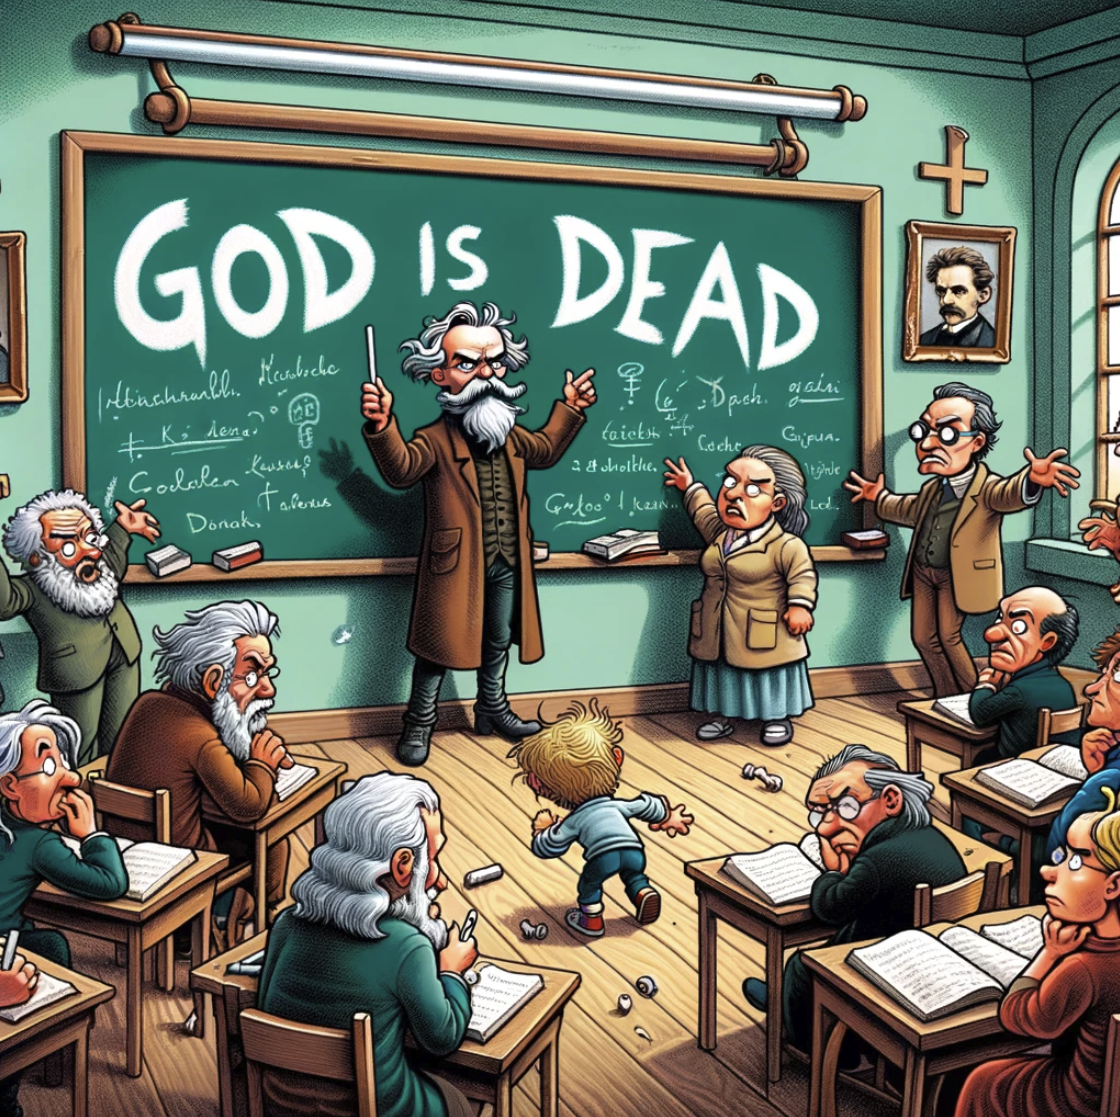 cartoon image illustrating Friedrich Nietzsche's philosophical concept of "God is Dead" in a whimsical classroom setting